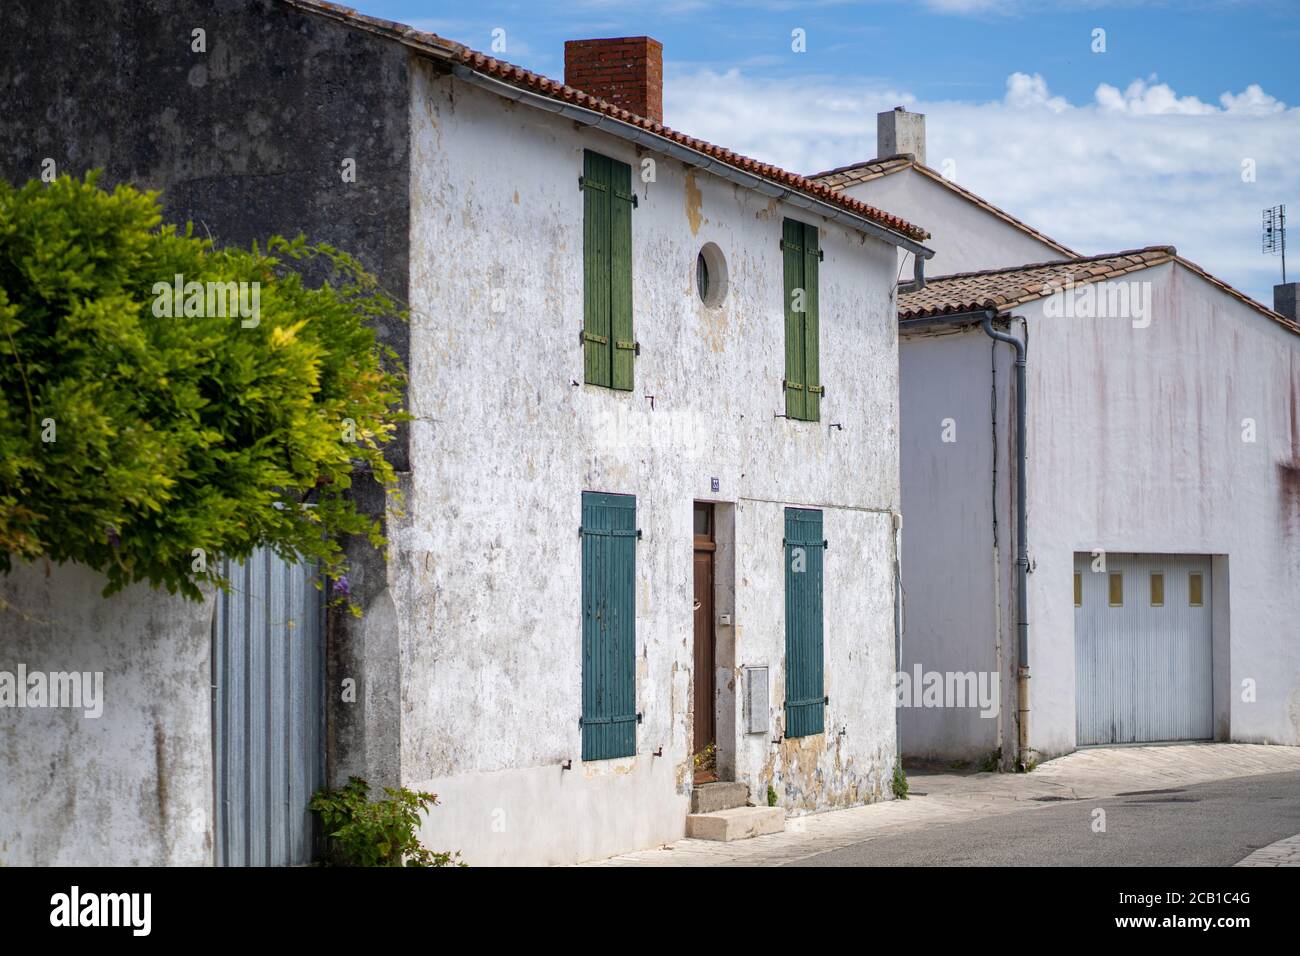 Shot of a stone building with green and blue shutters in Ars-en-re, on the french Re island Stock Photo